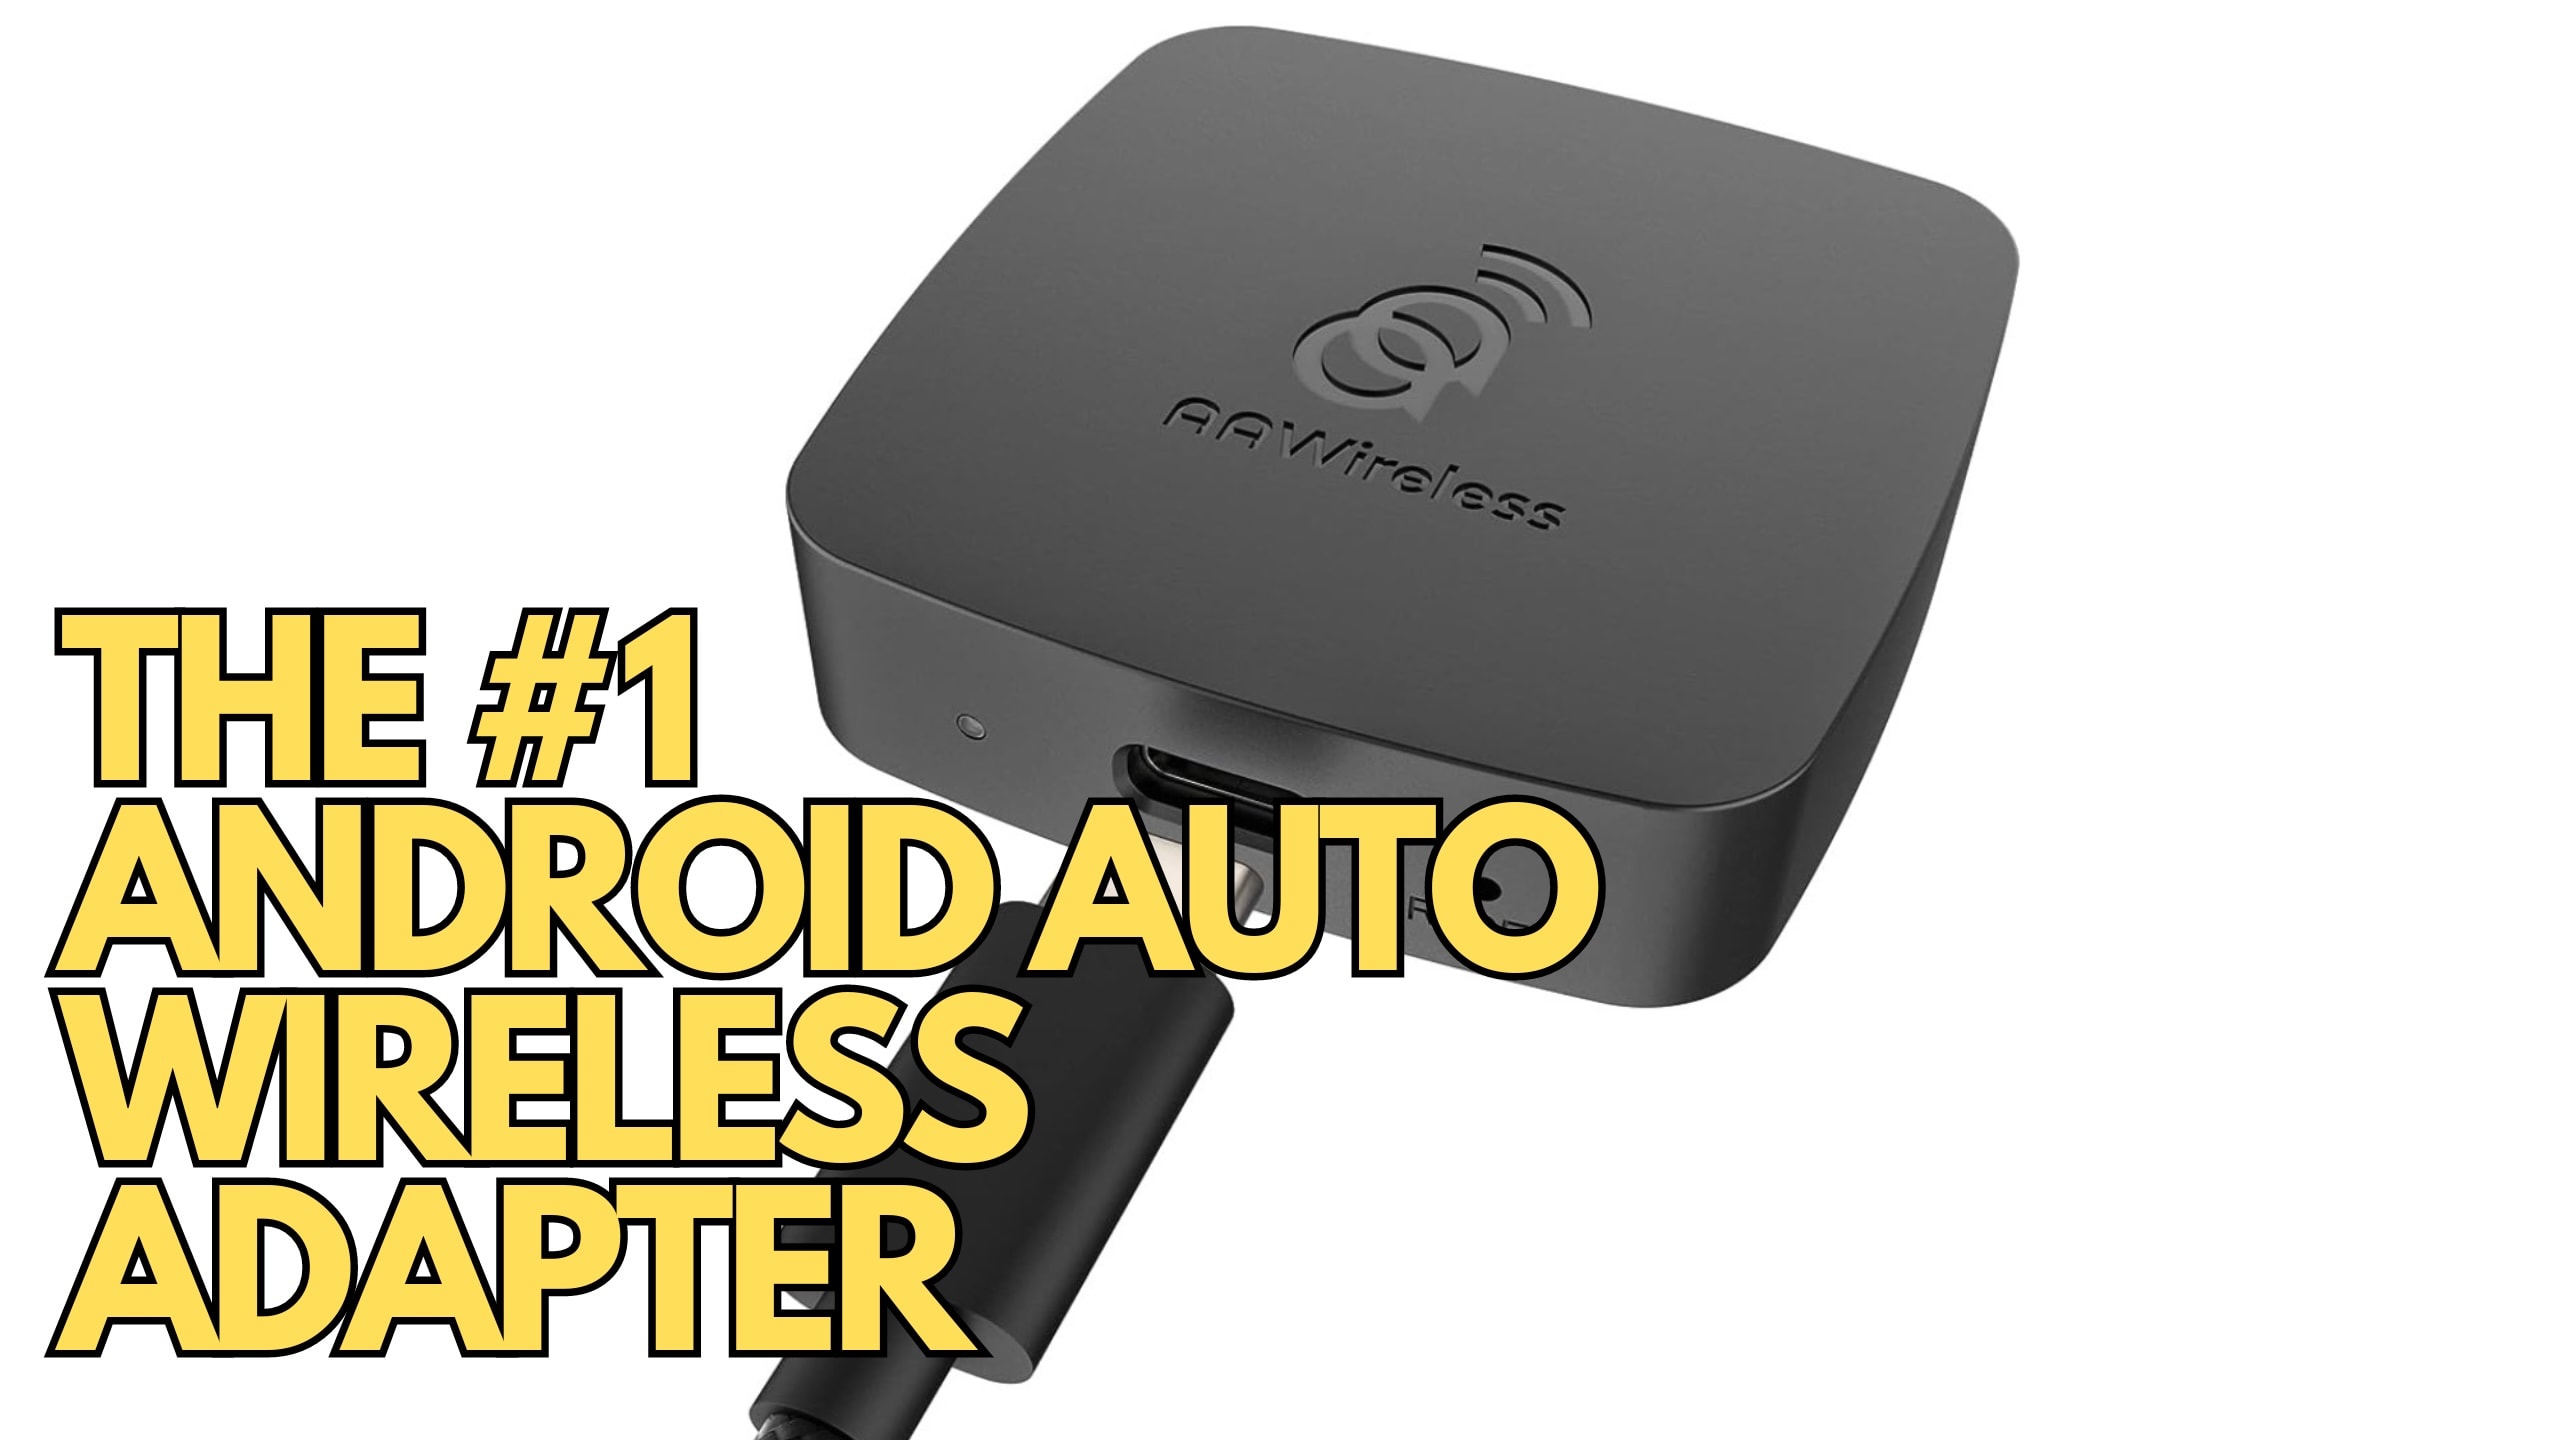 The World's Top Android Auto Wireless Adapter Is Now Cheaper